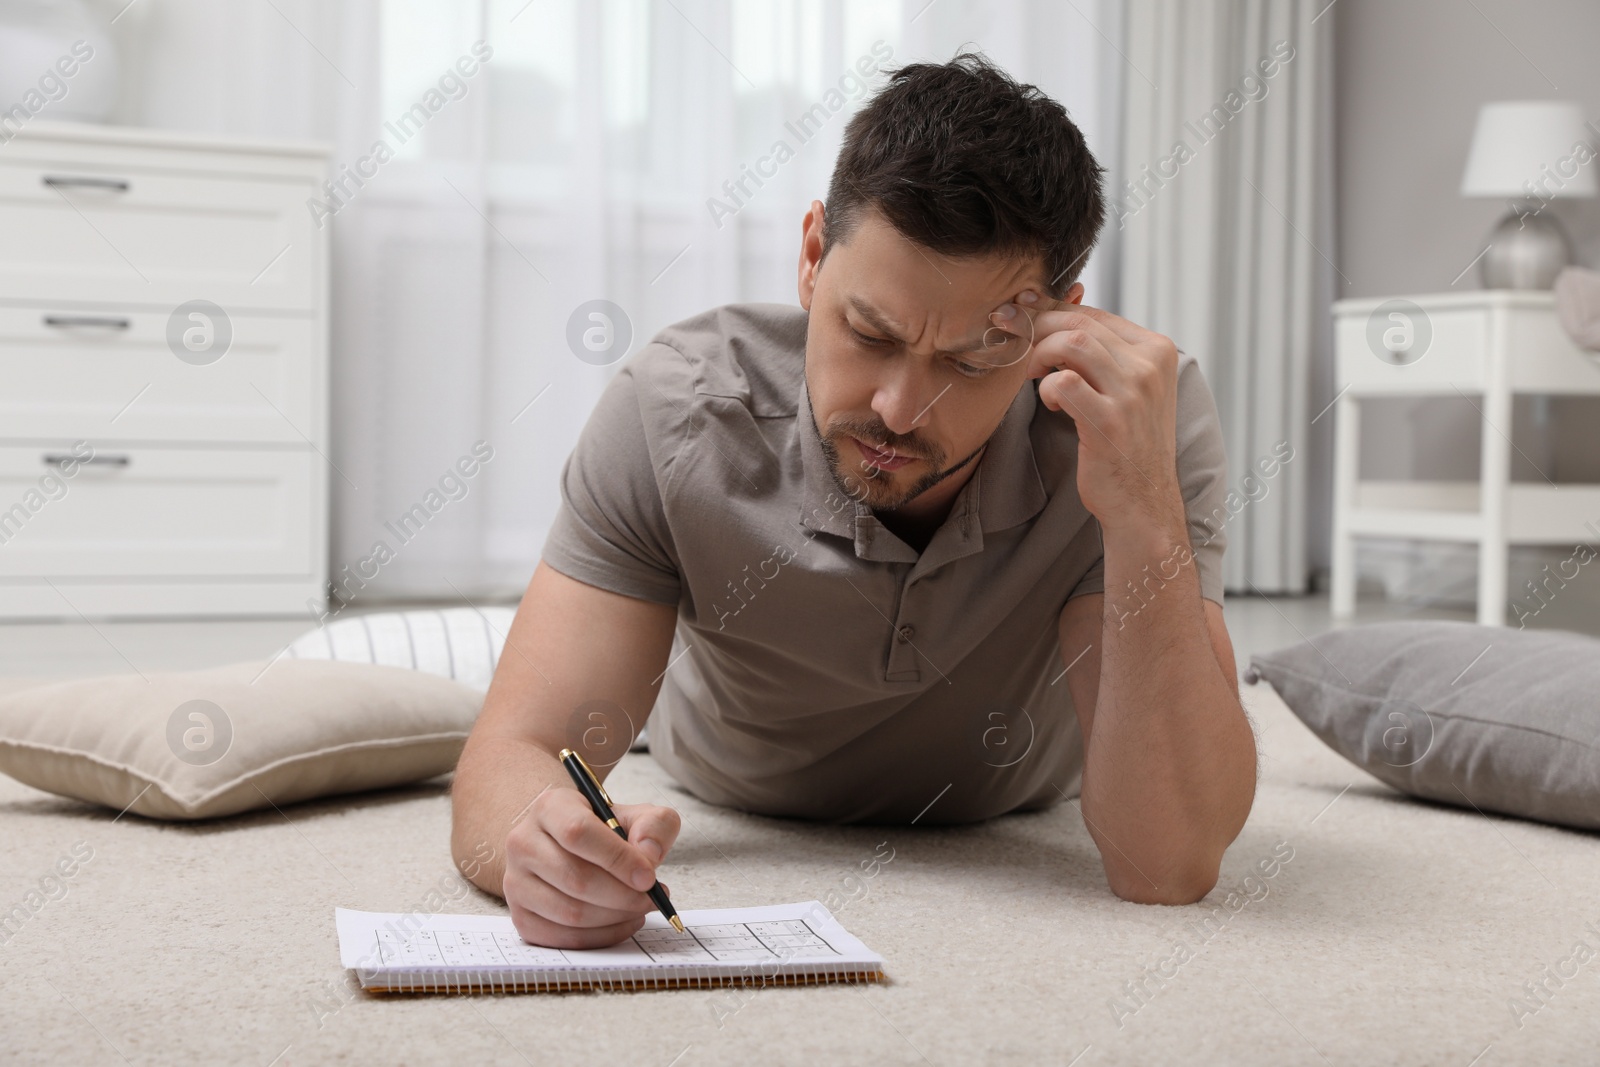 Photo of Man solving sudoku puzzle on floor at home